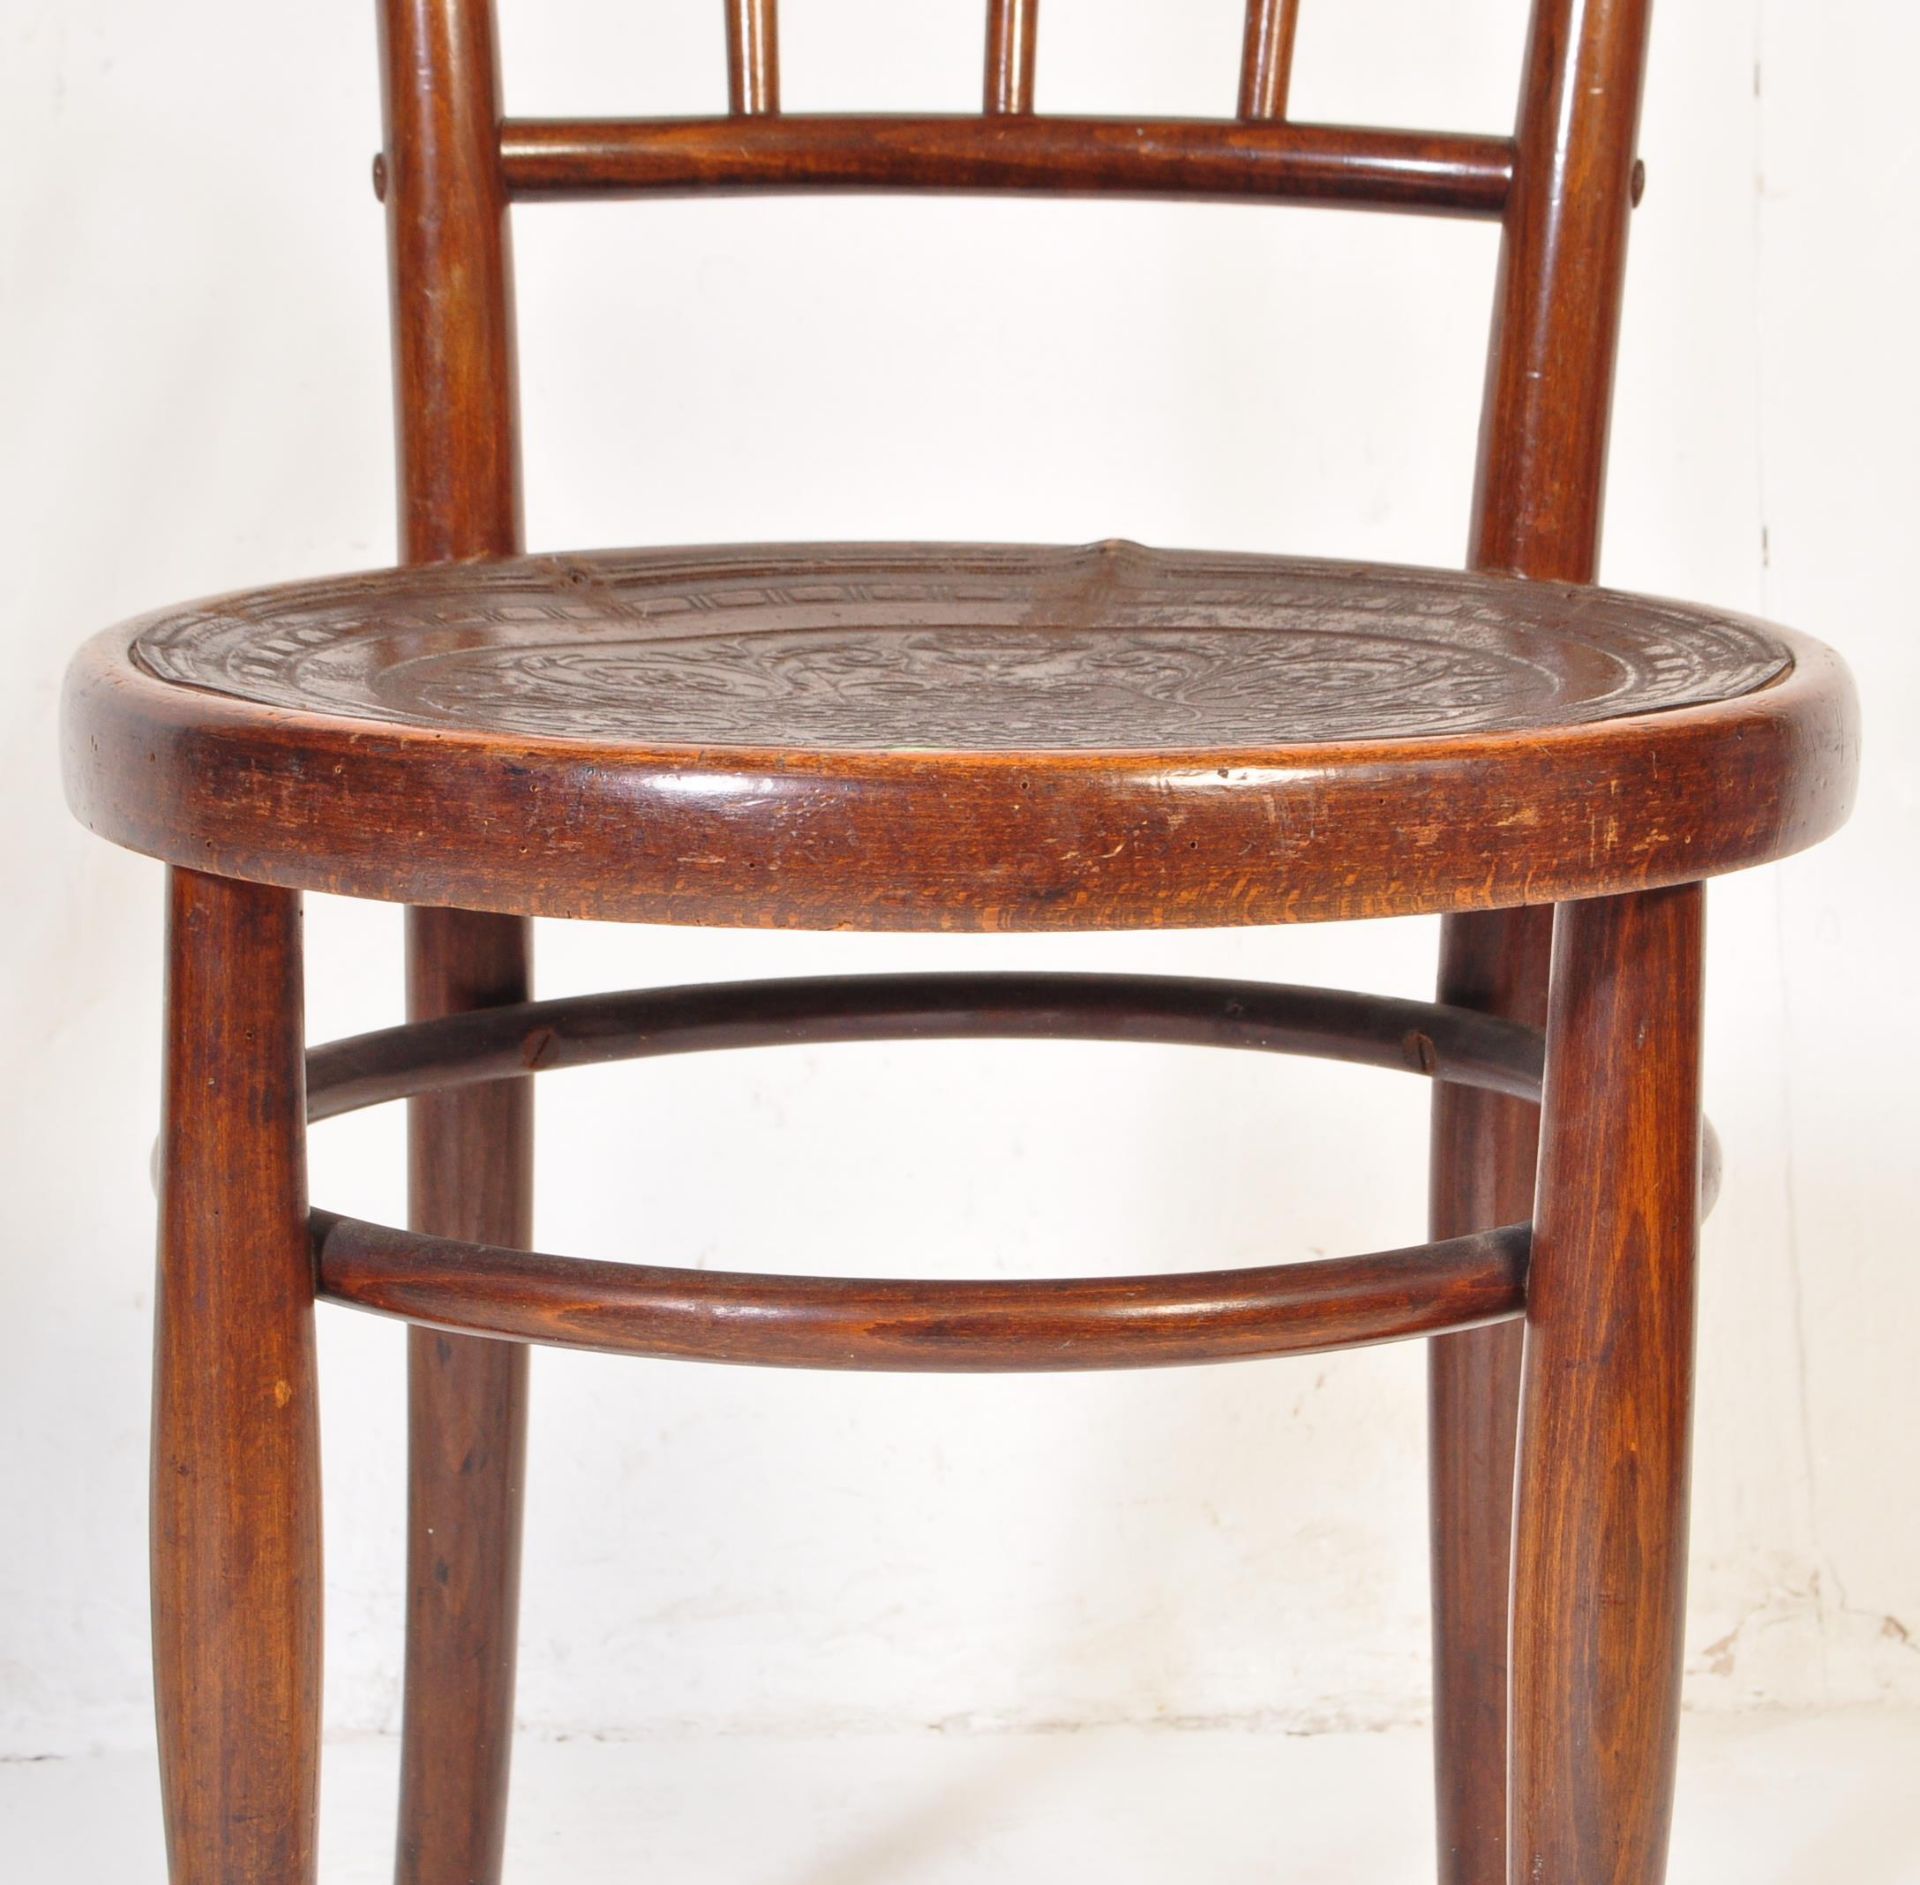 PAIR OF MID 20TH CENTURY BENTWOOD CAFE CHAIRS - Image 5 of 8